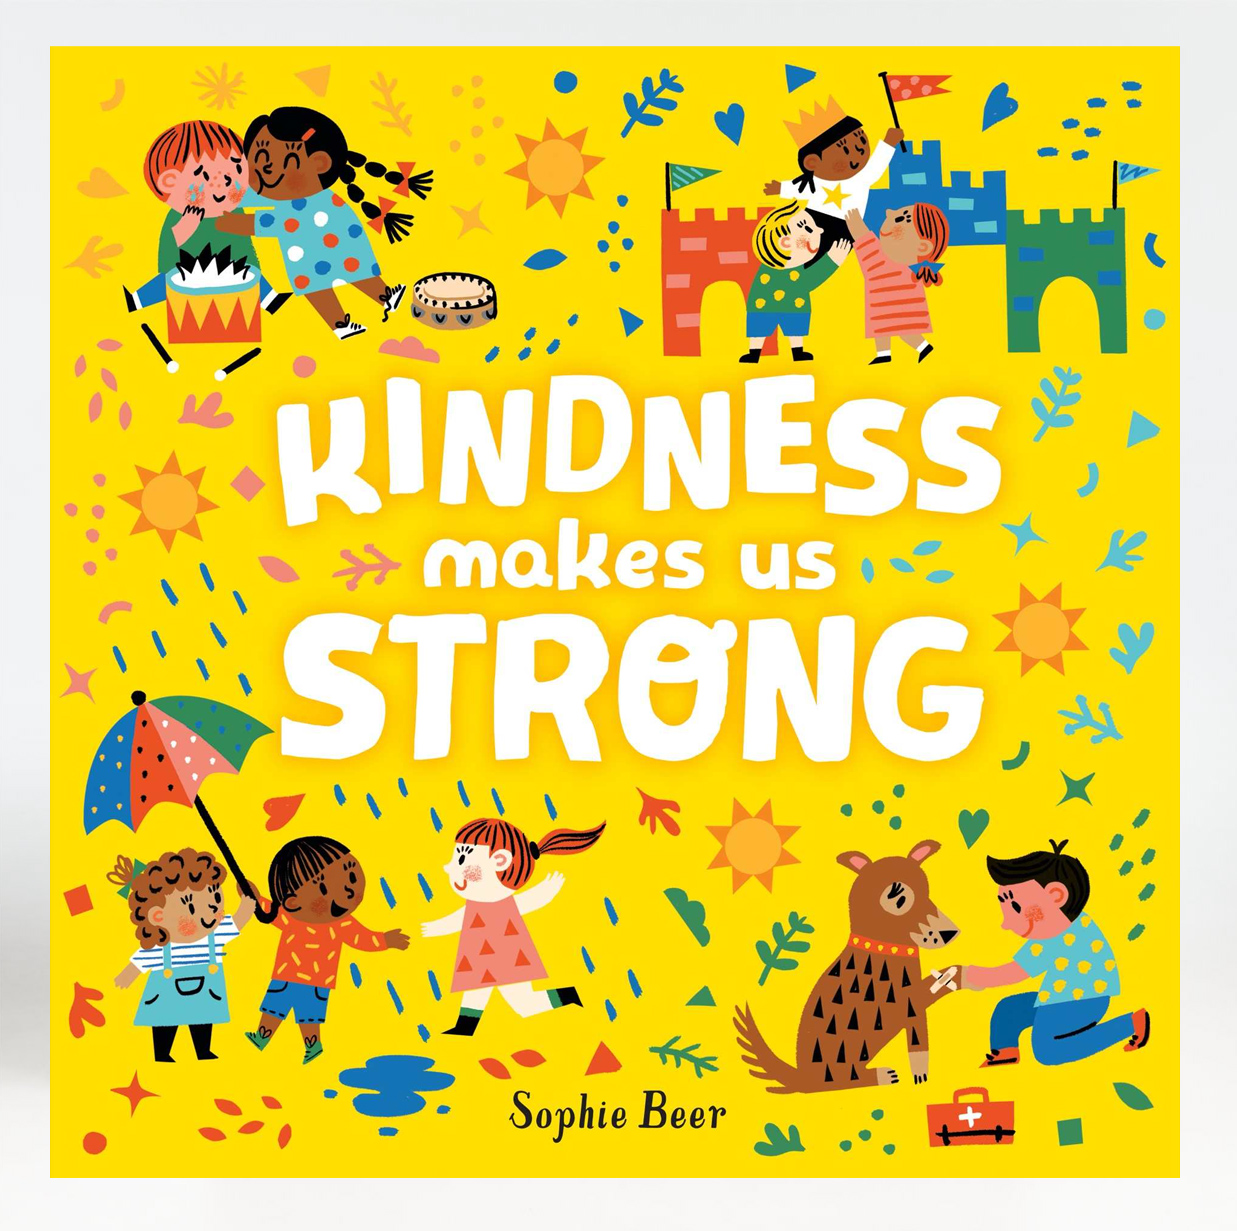 Kindness Makes Us Strong book